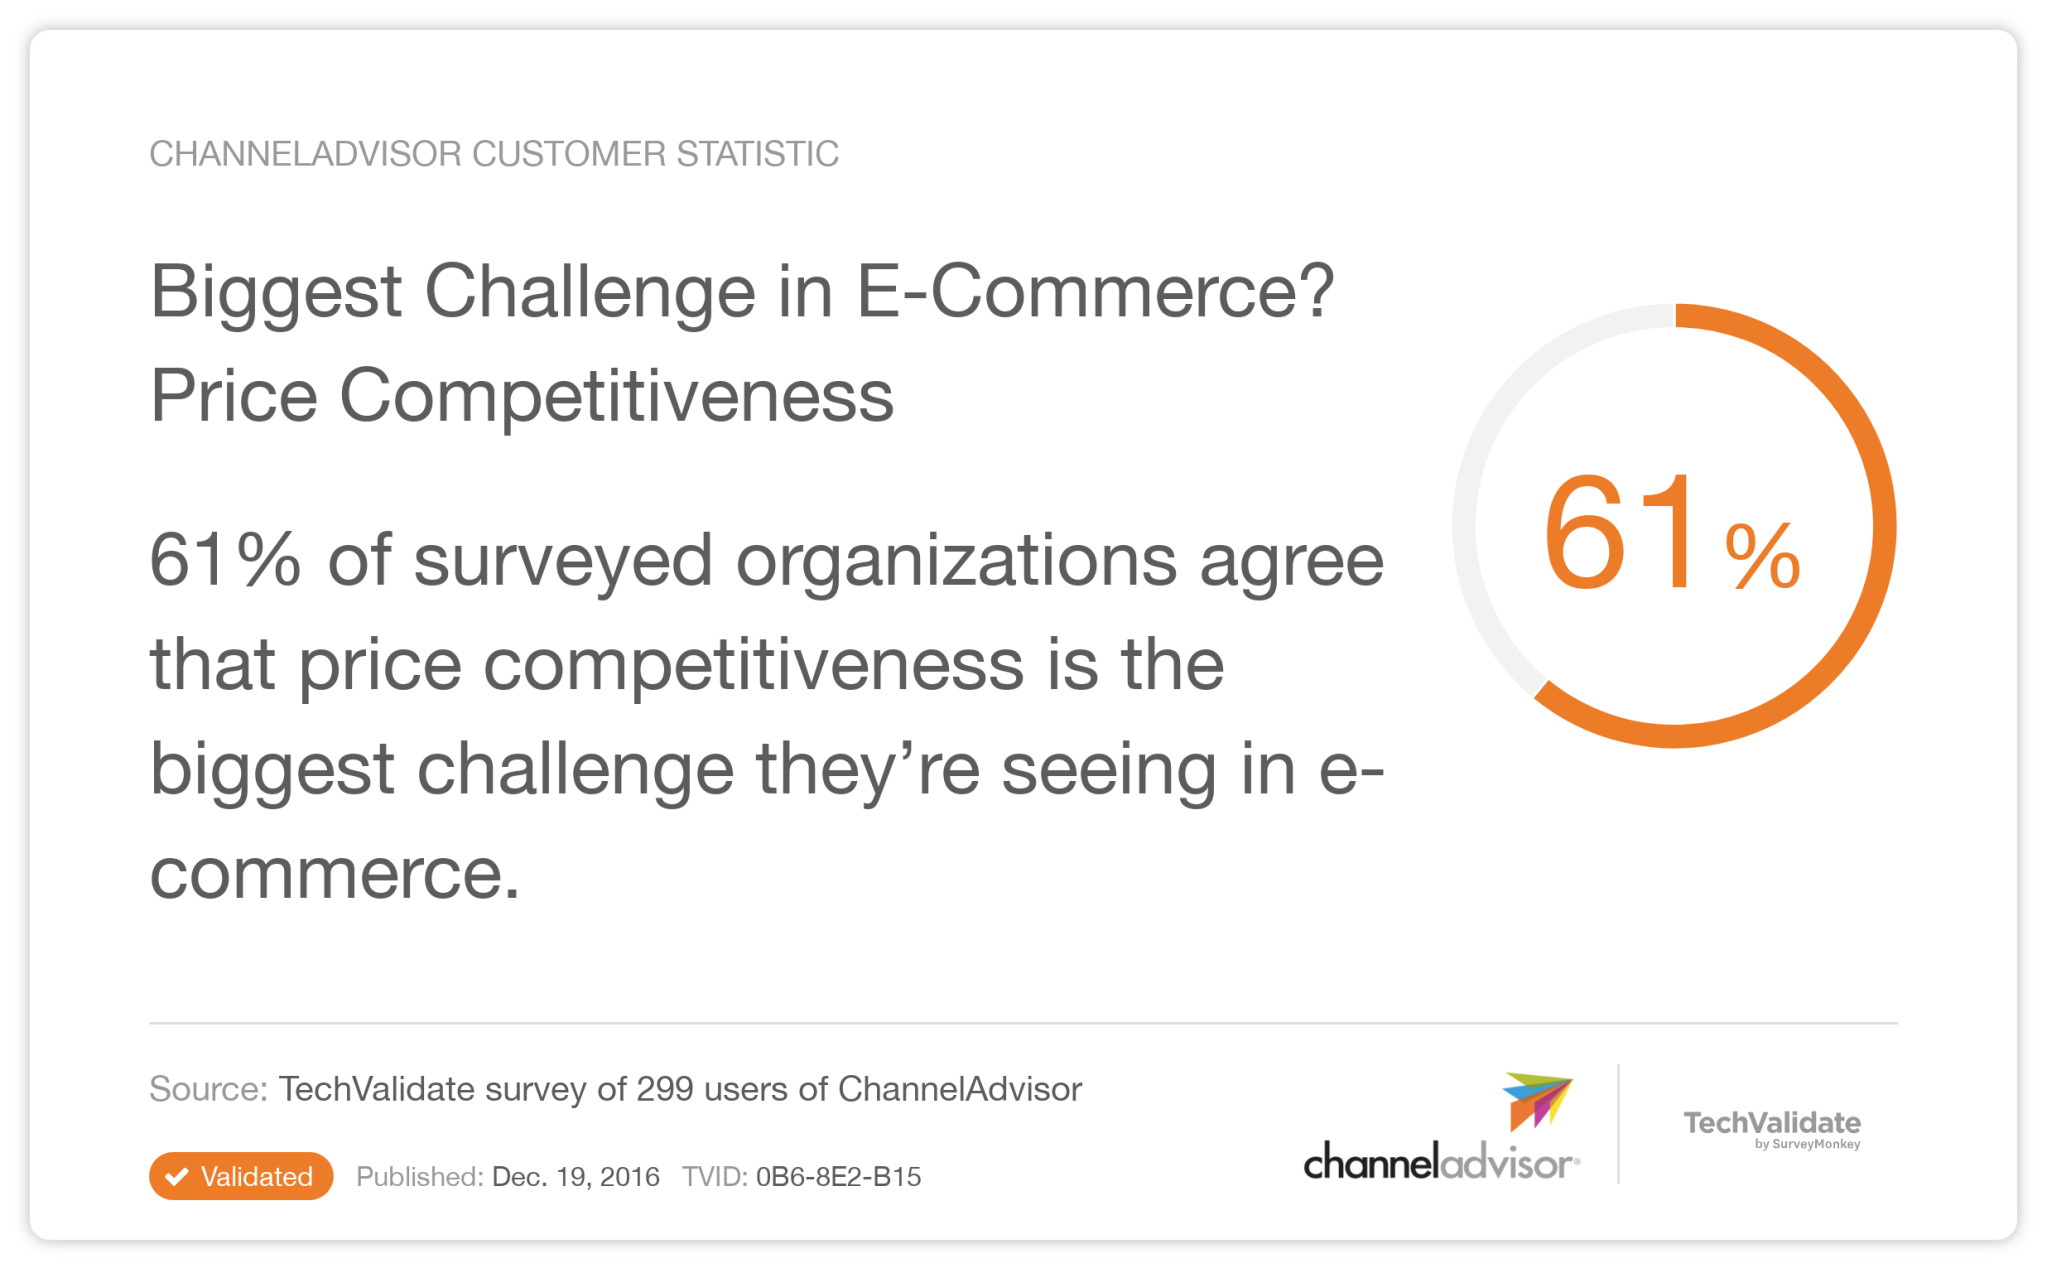 Price competitiveness is the biggest challenge in eCommerce